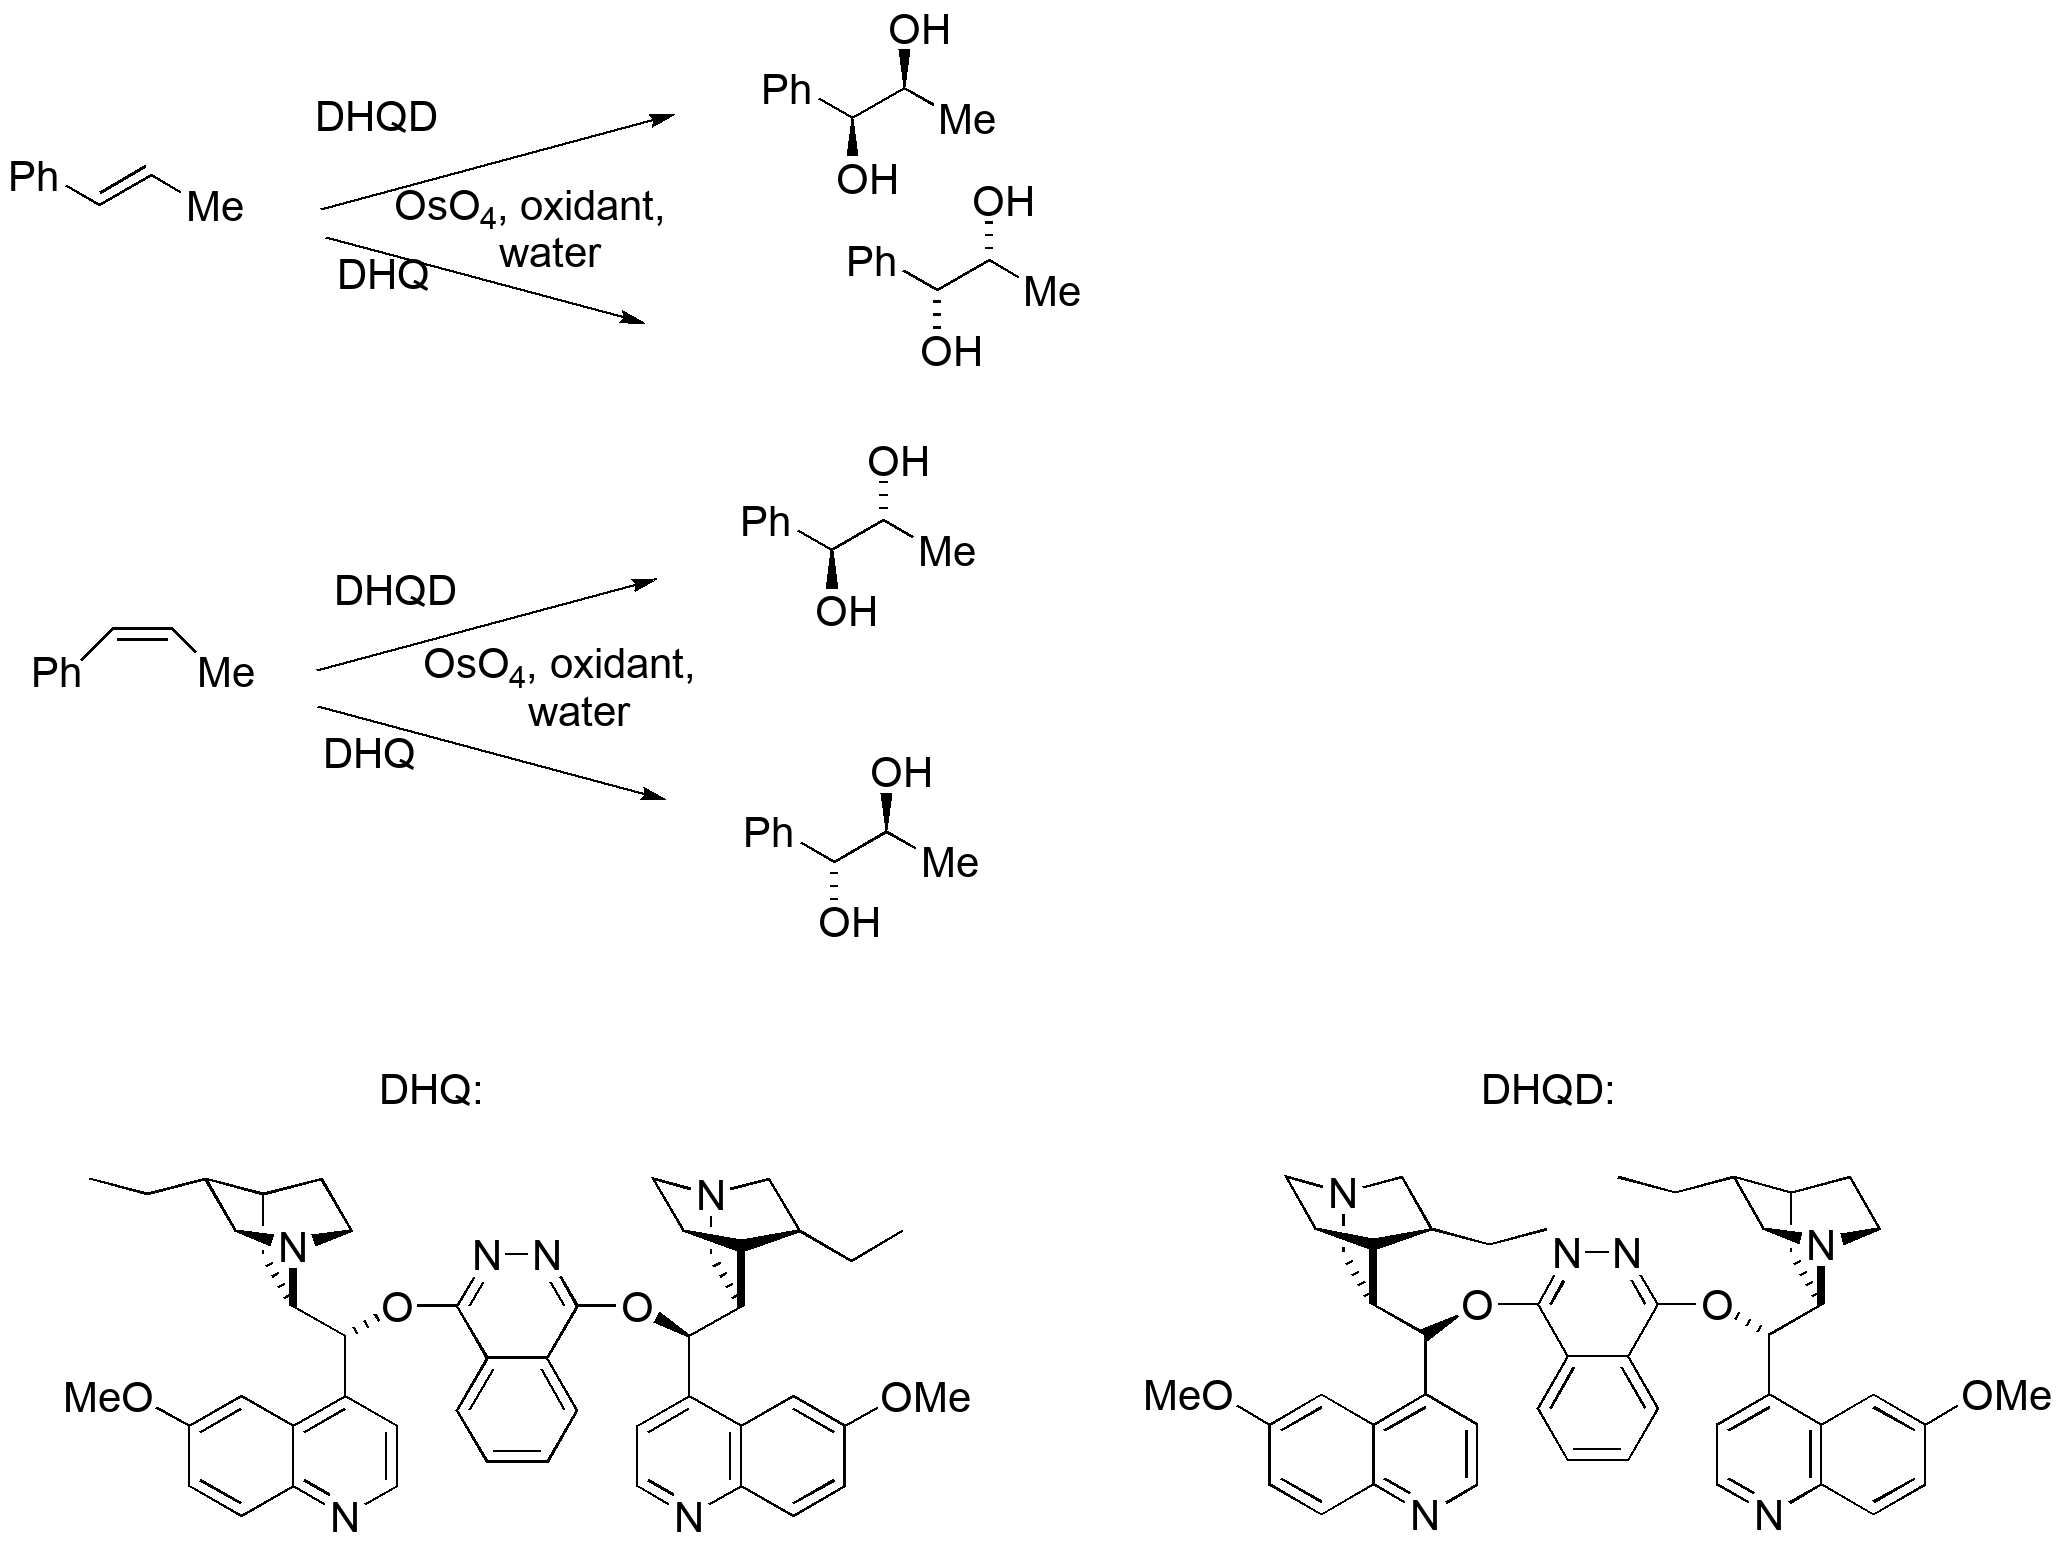 Generation of 4 stereoisomers (two pairs of enantiomers) from 1-phenylpropene using catalytic OsO4 and different chiral alkaloid ligands.